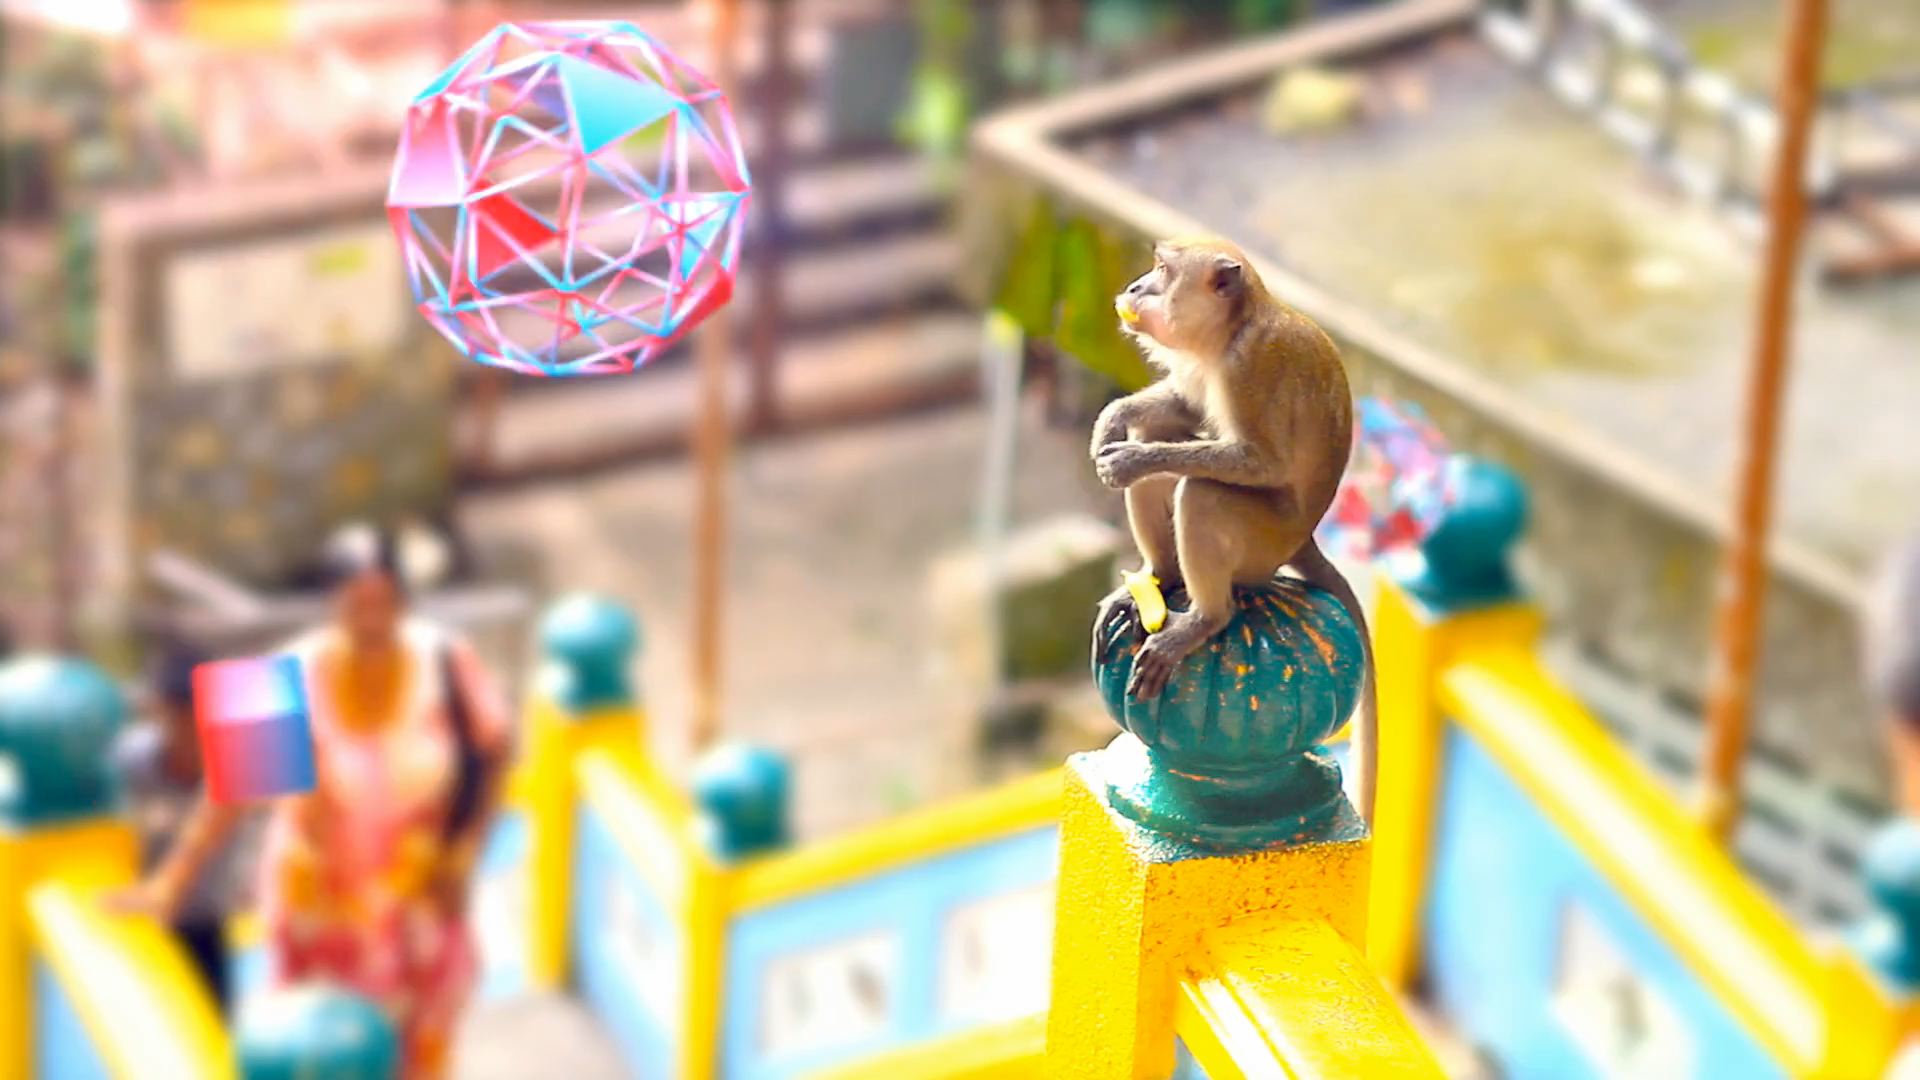 Live-action monkey looking at motion graphics flying past